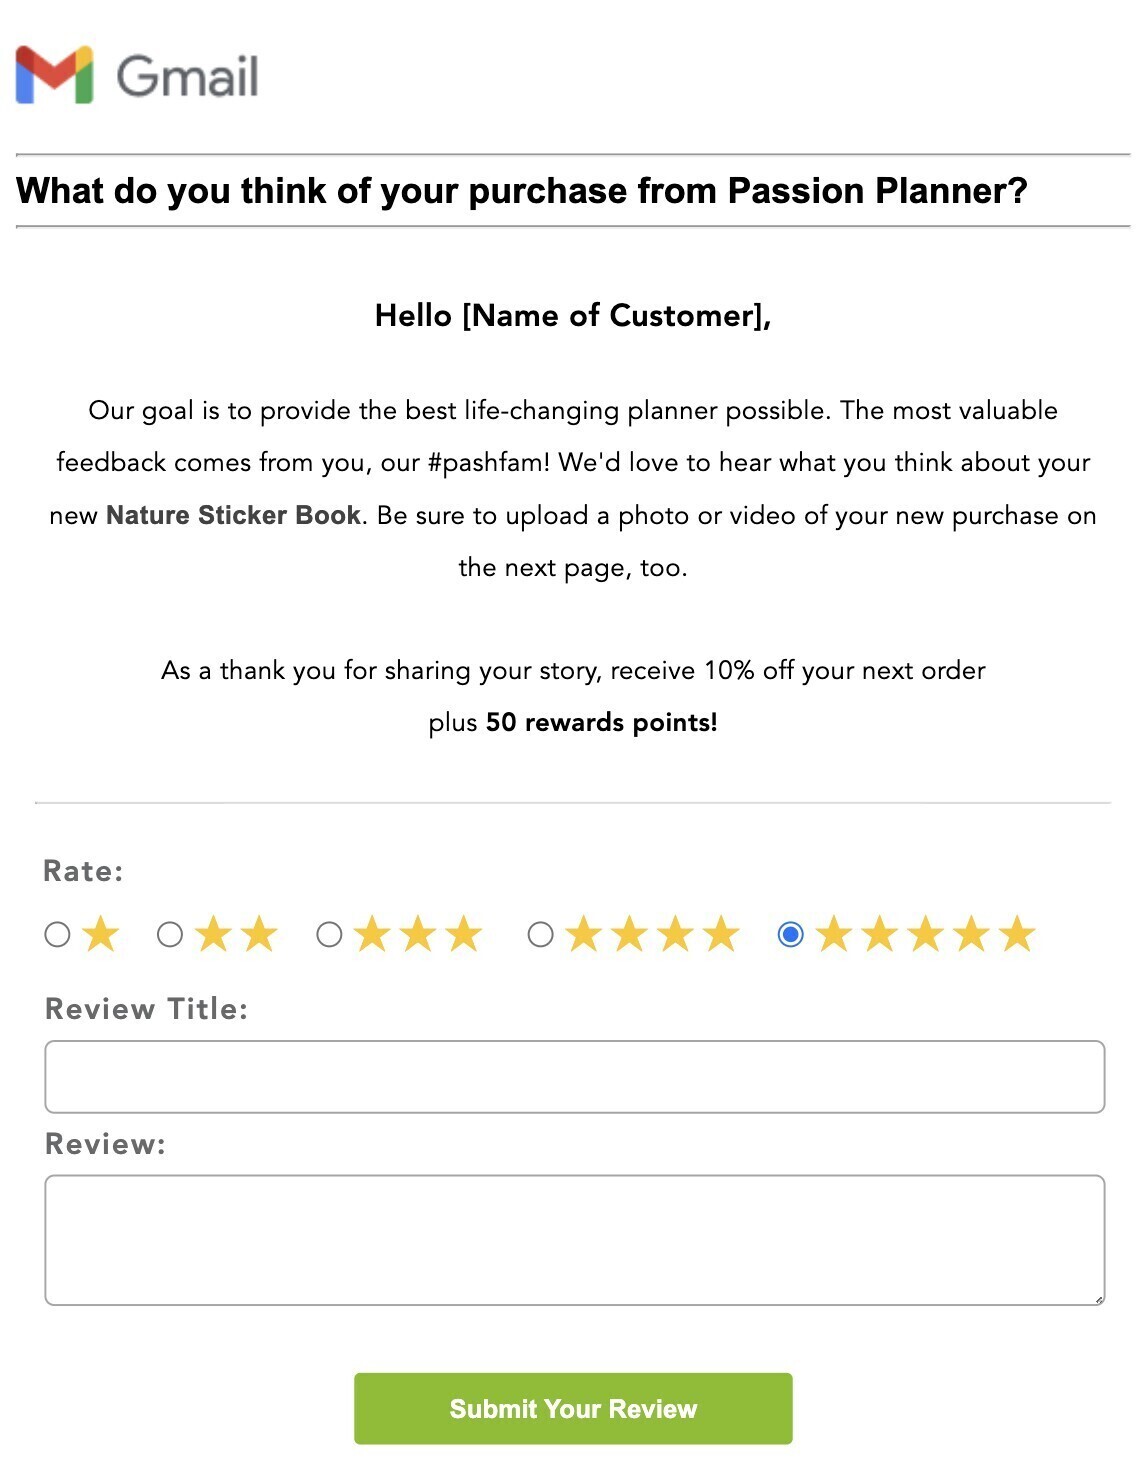 Passion Planner email review form